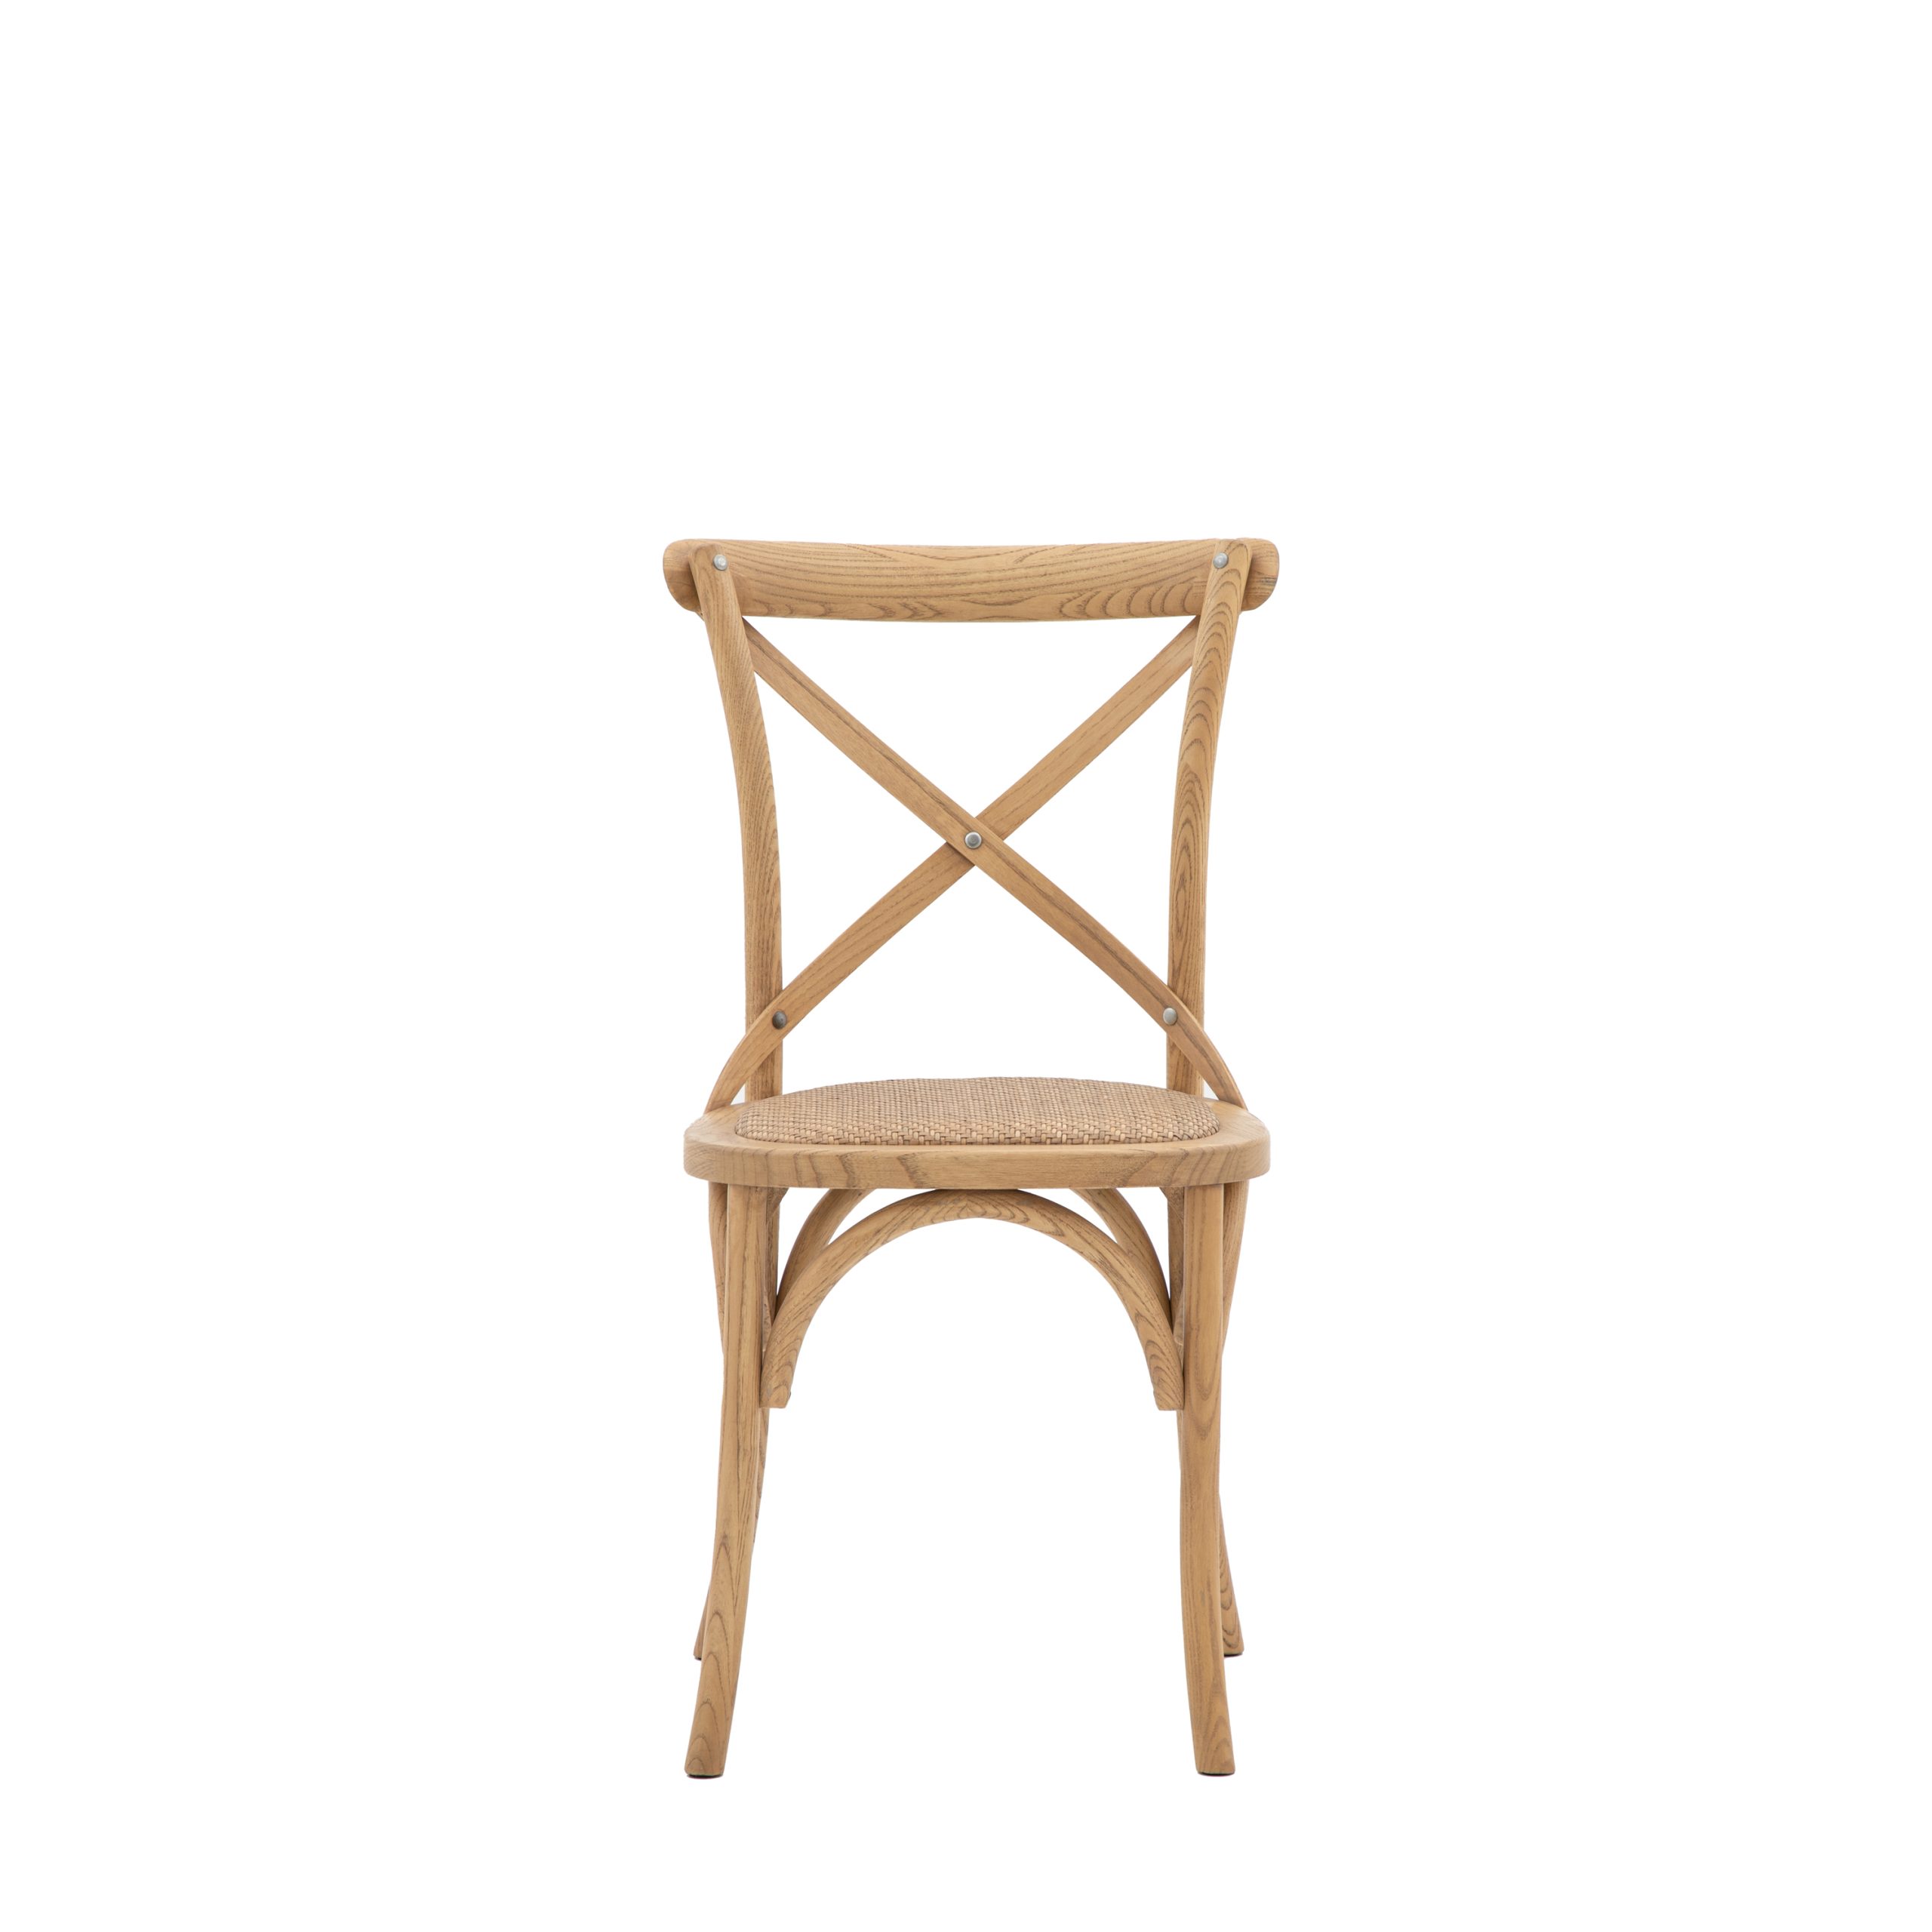 Gallery Direct Cafe Chair Natural/Rattan (Set of 2)